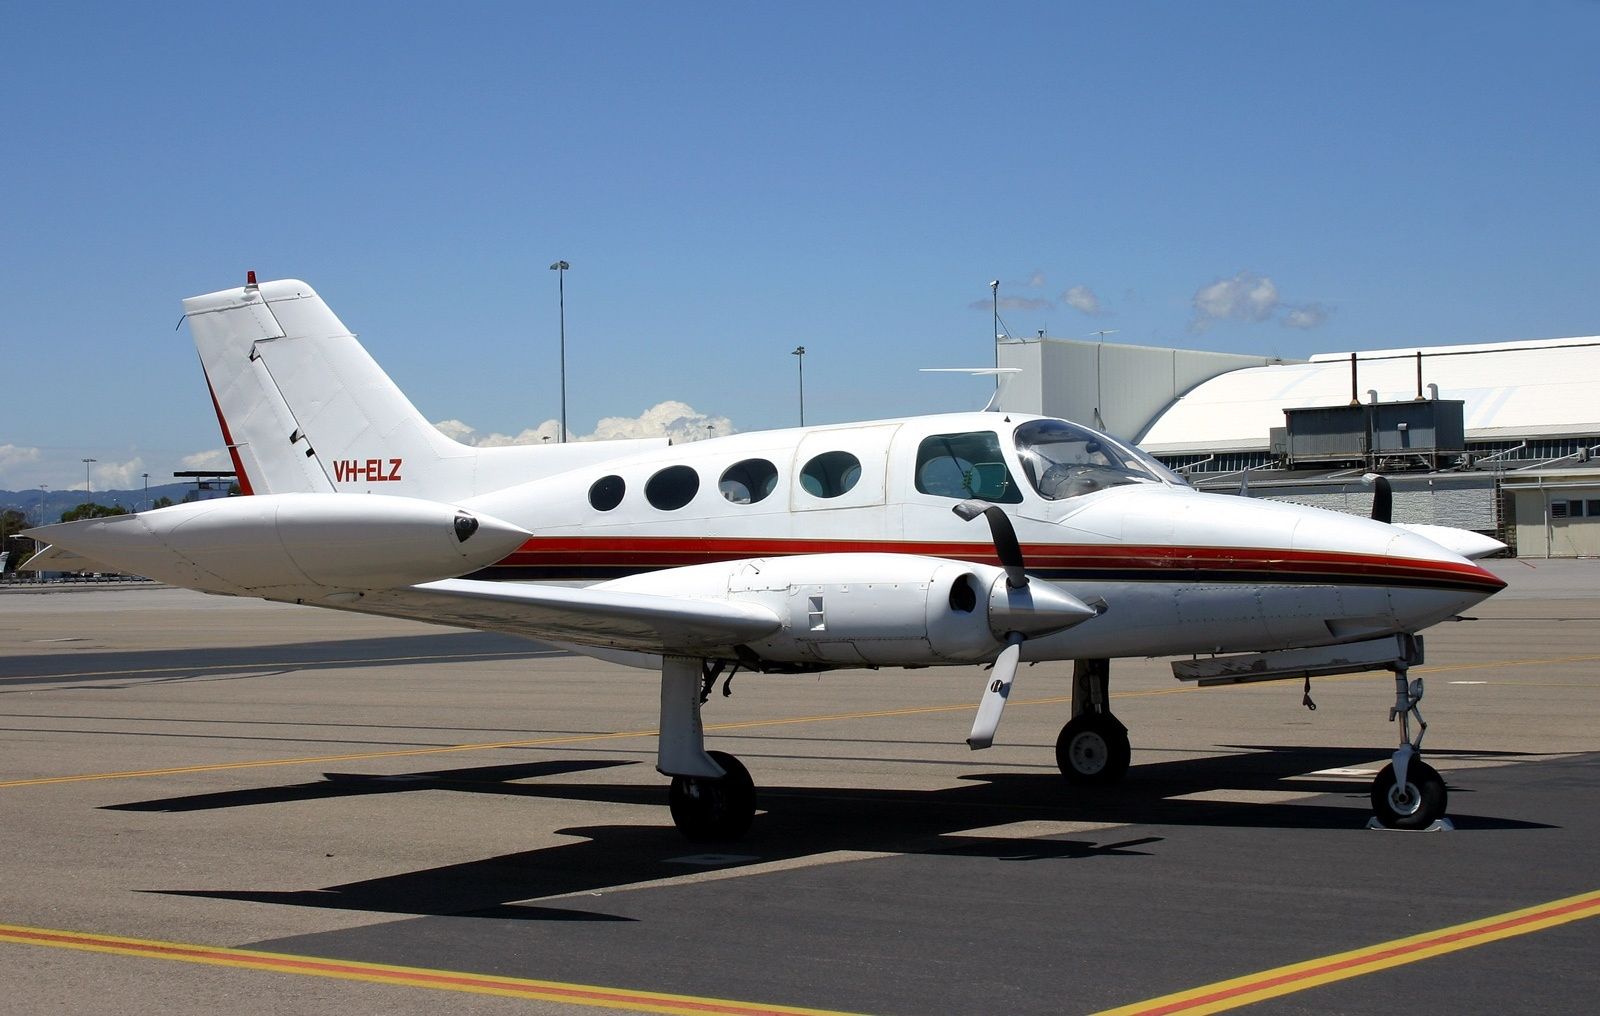 A Cessna 402 parked at an airport.